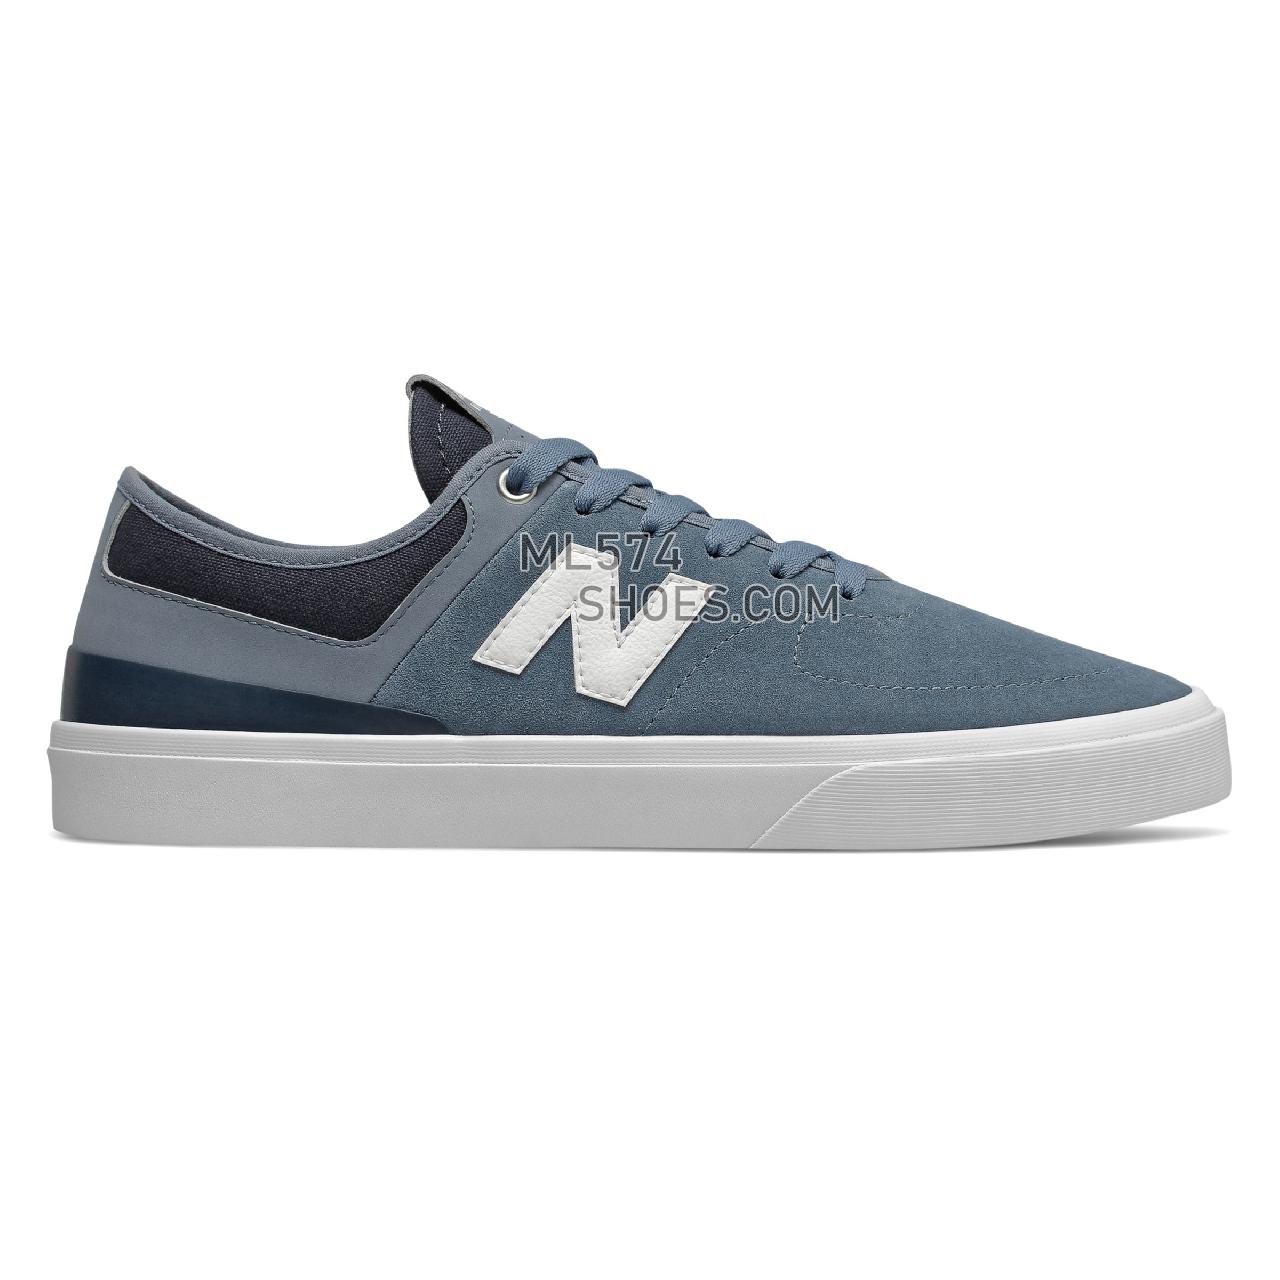 New Balance Numeric 379 - Men's NB Numeric Skate - Navy with White - NM379CHM